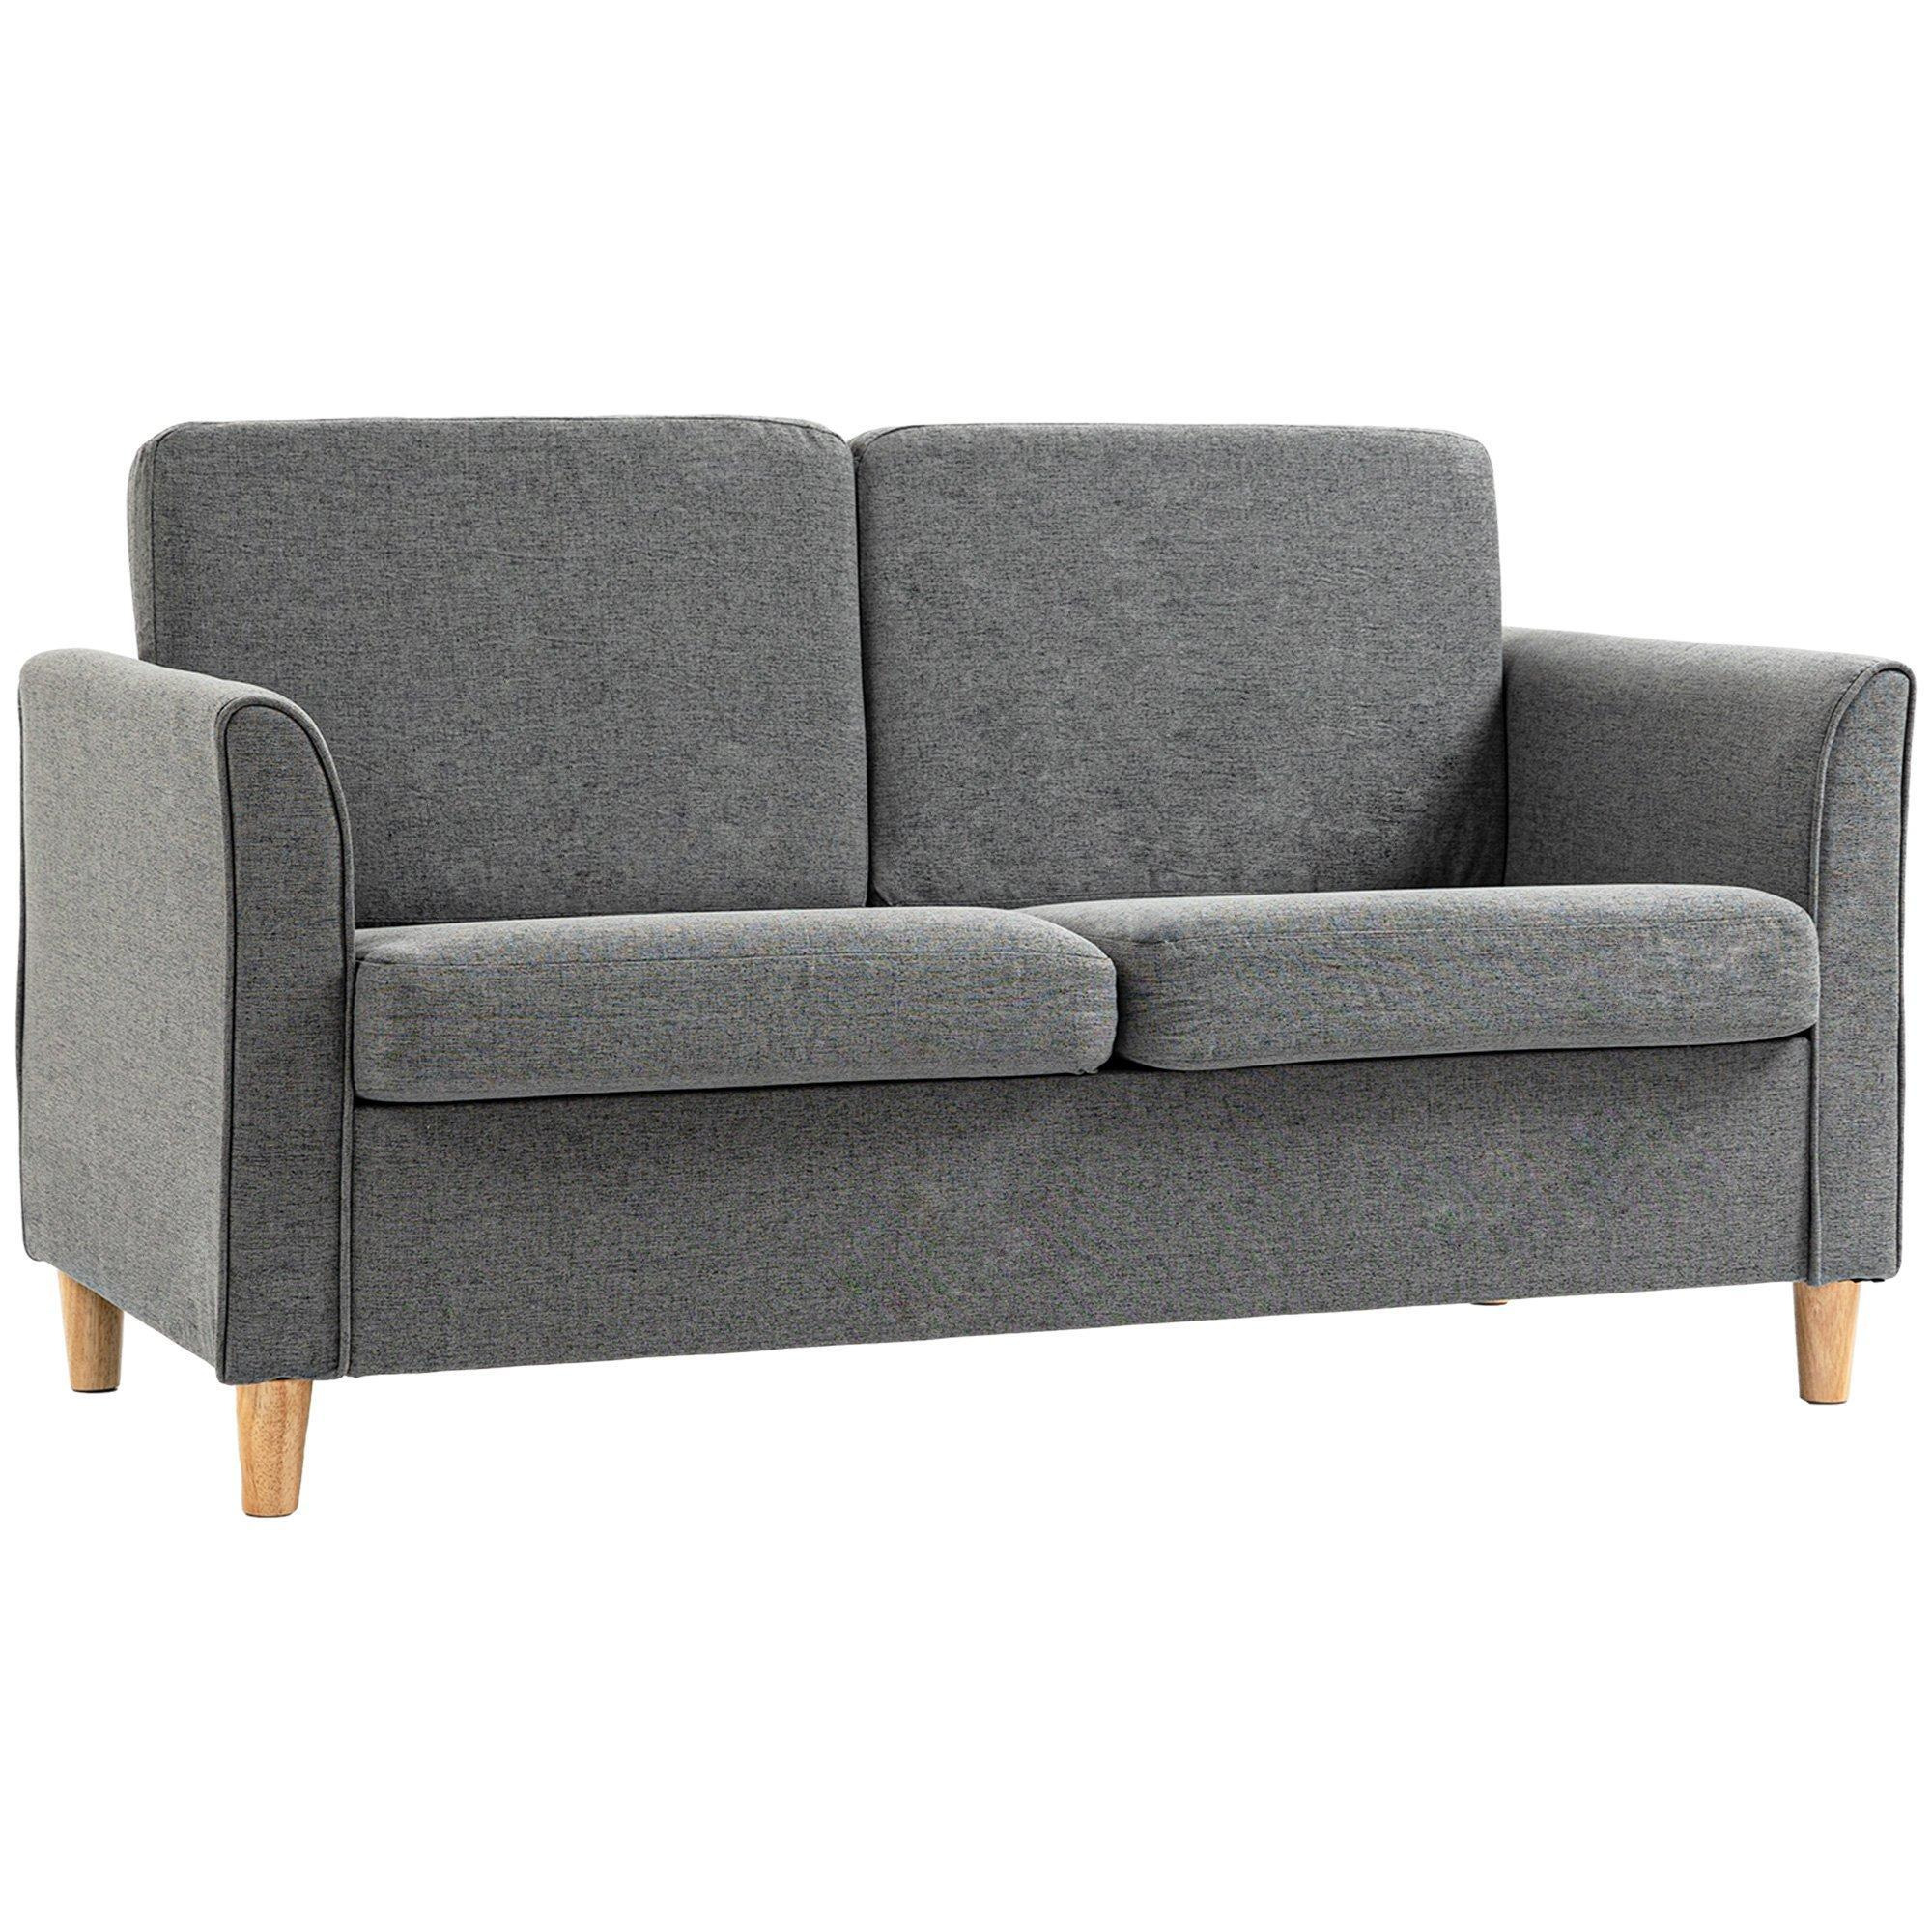 Double Seat Sofa Loveseat Couch 2 Seater Linen Armchair with Wood Legs - image 1